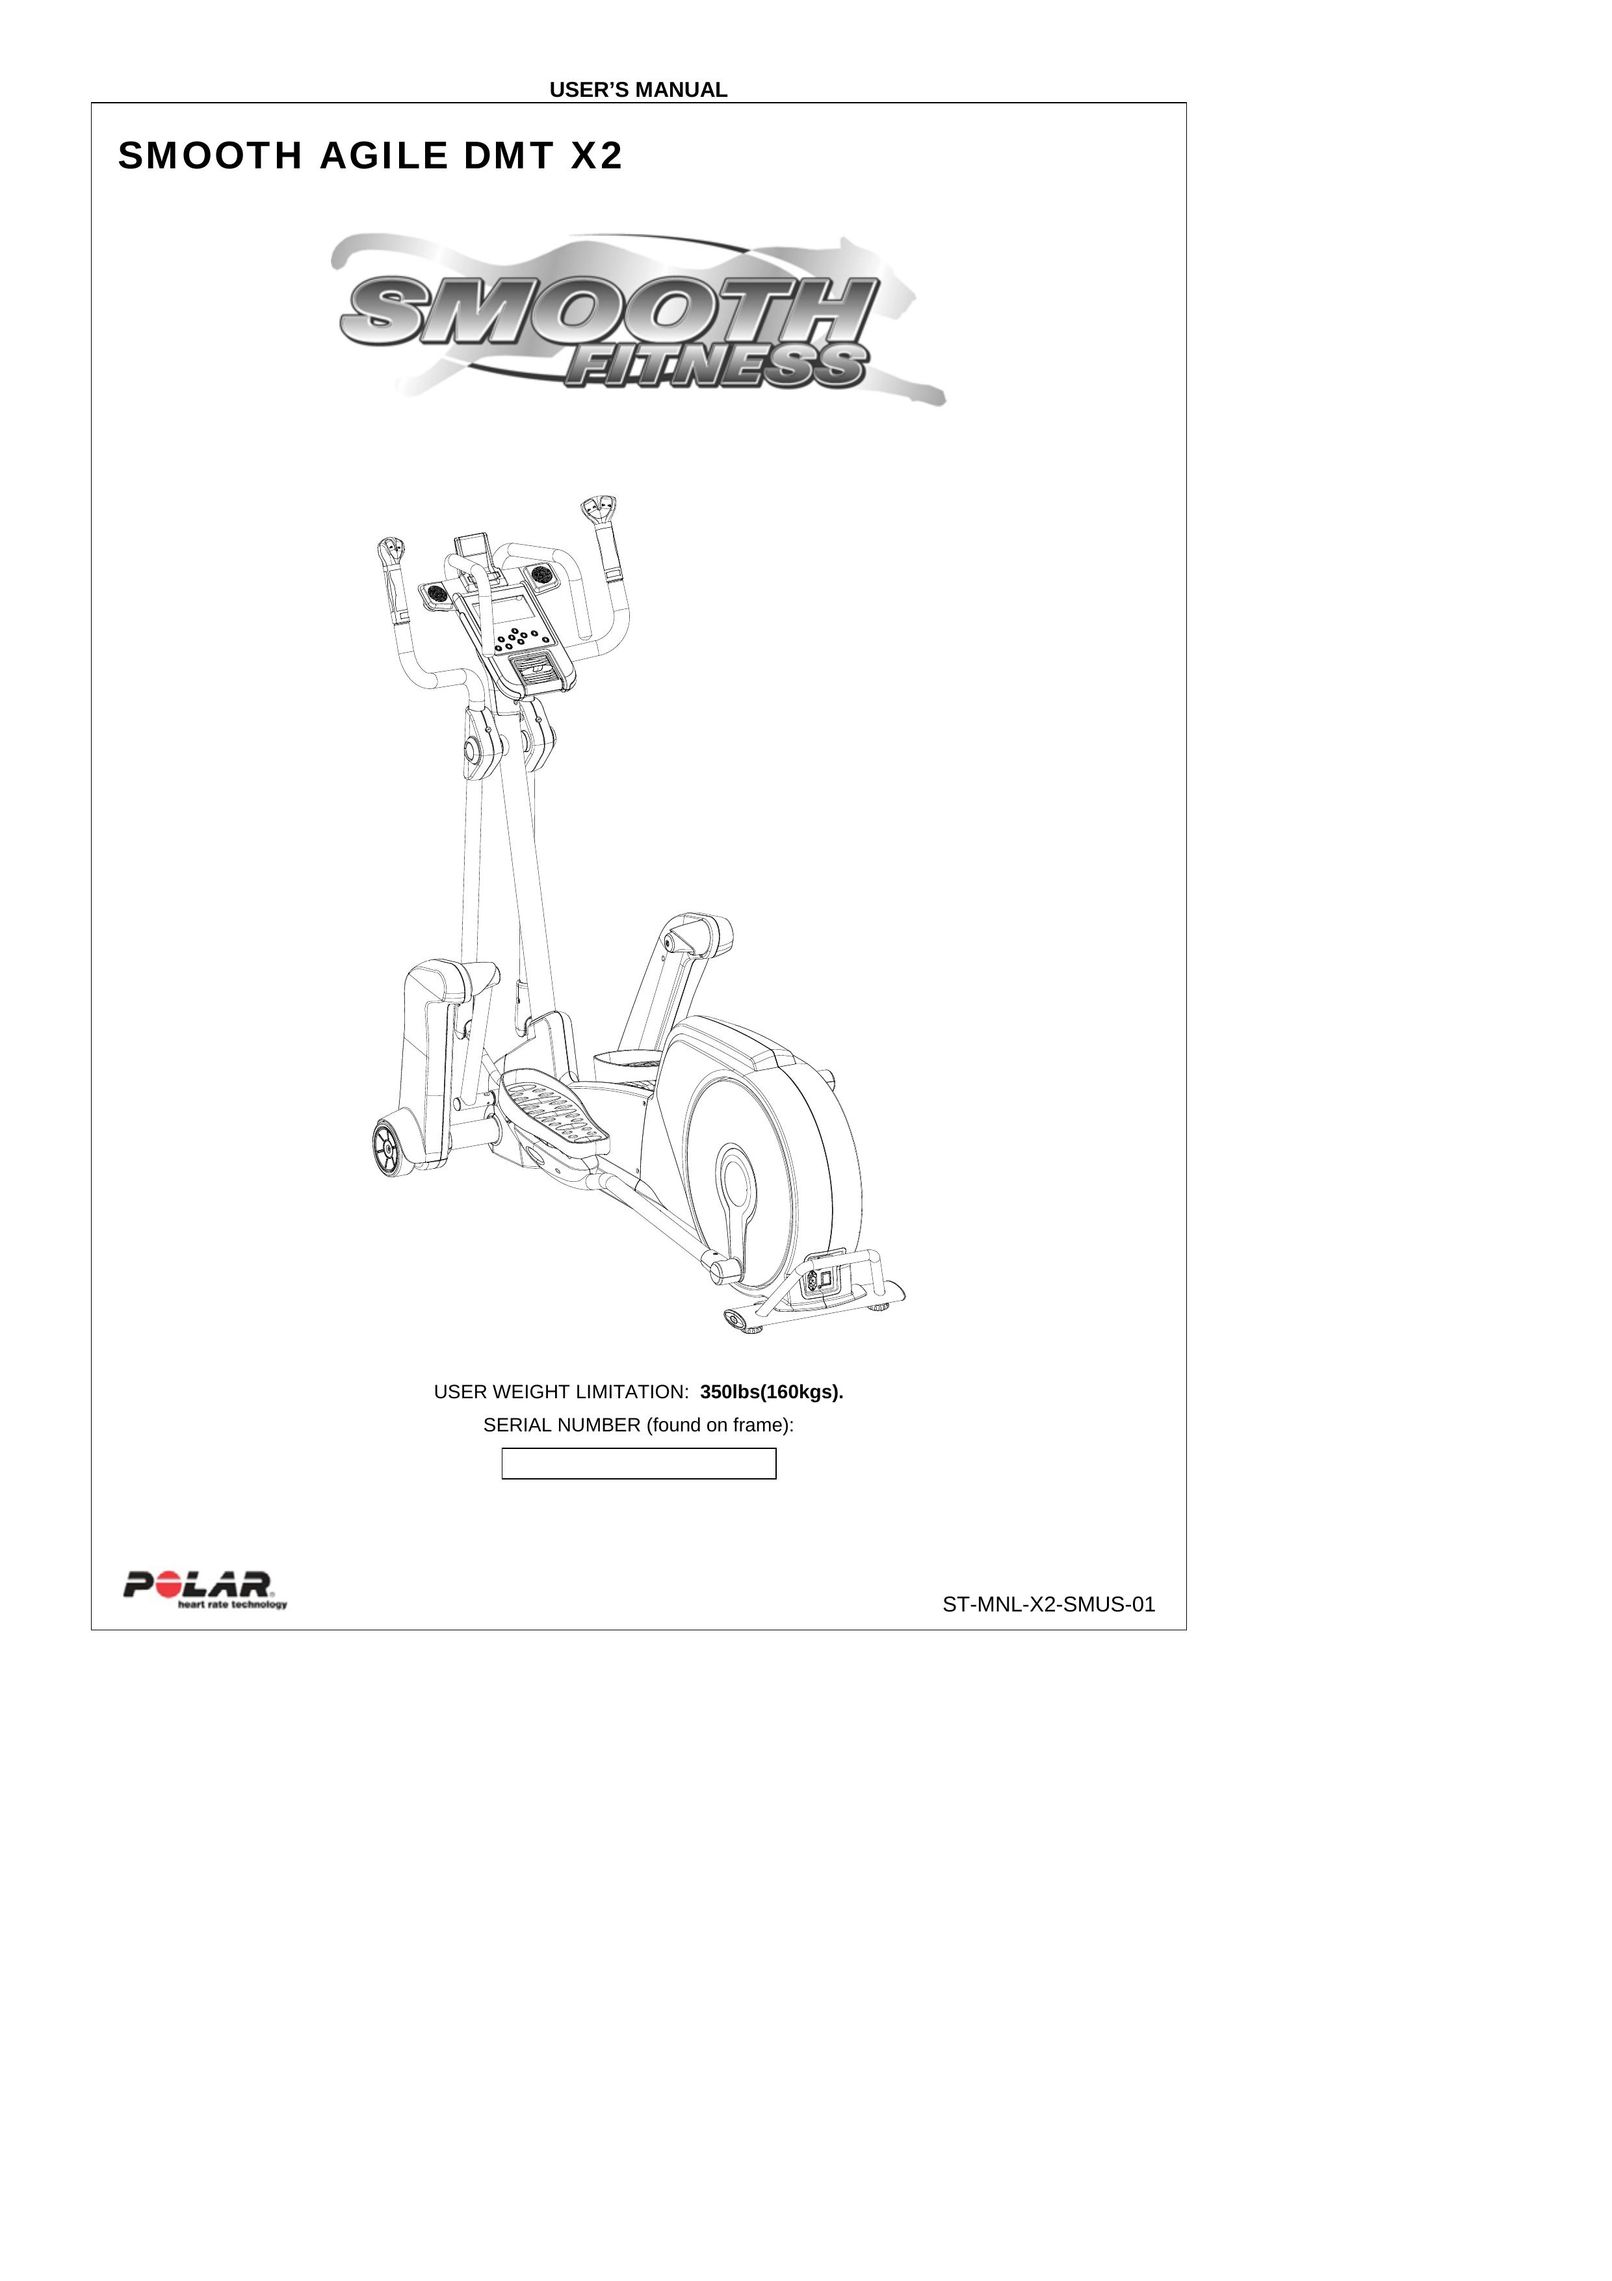 Polar DMT X2 Bicycle Accessories User Manual